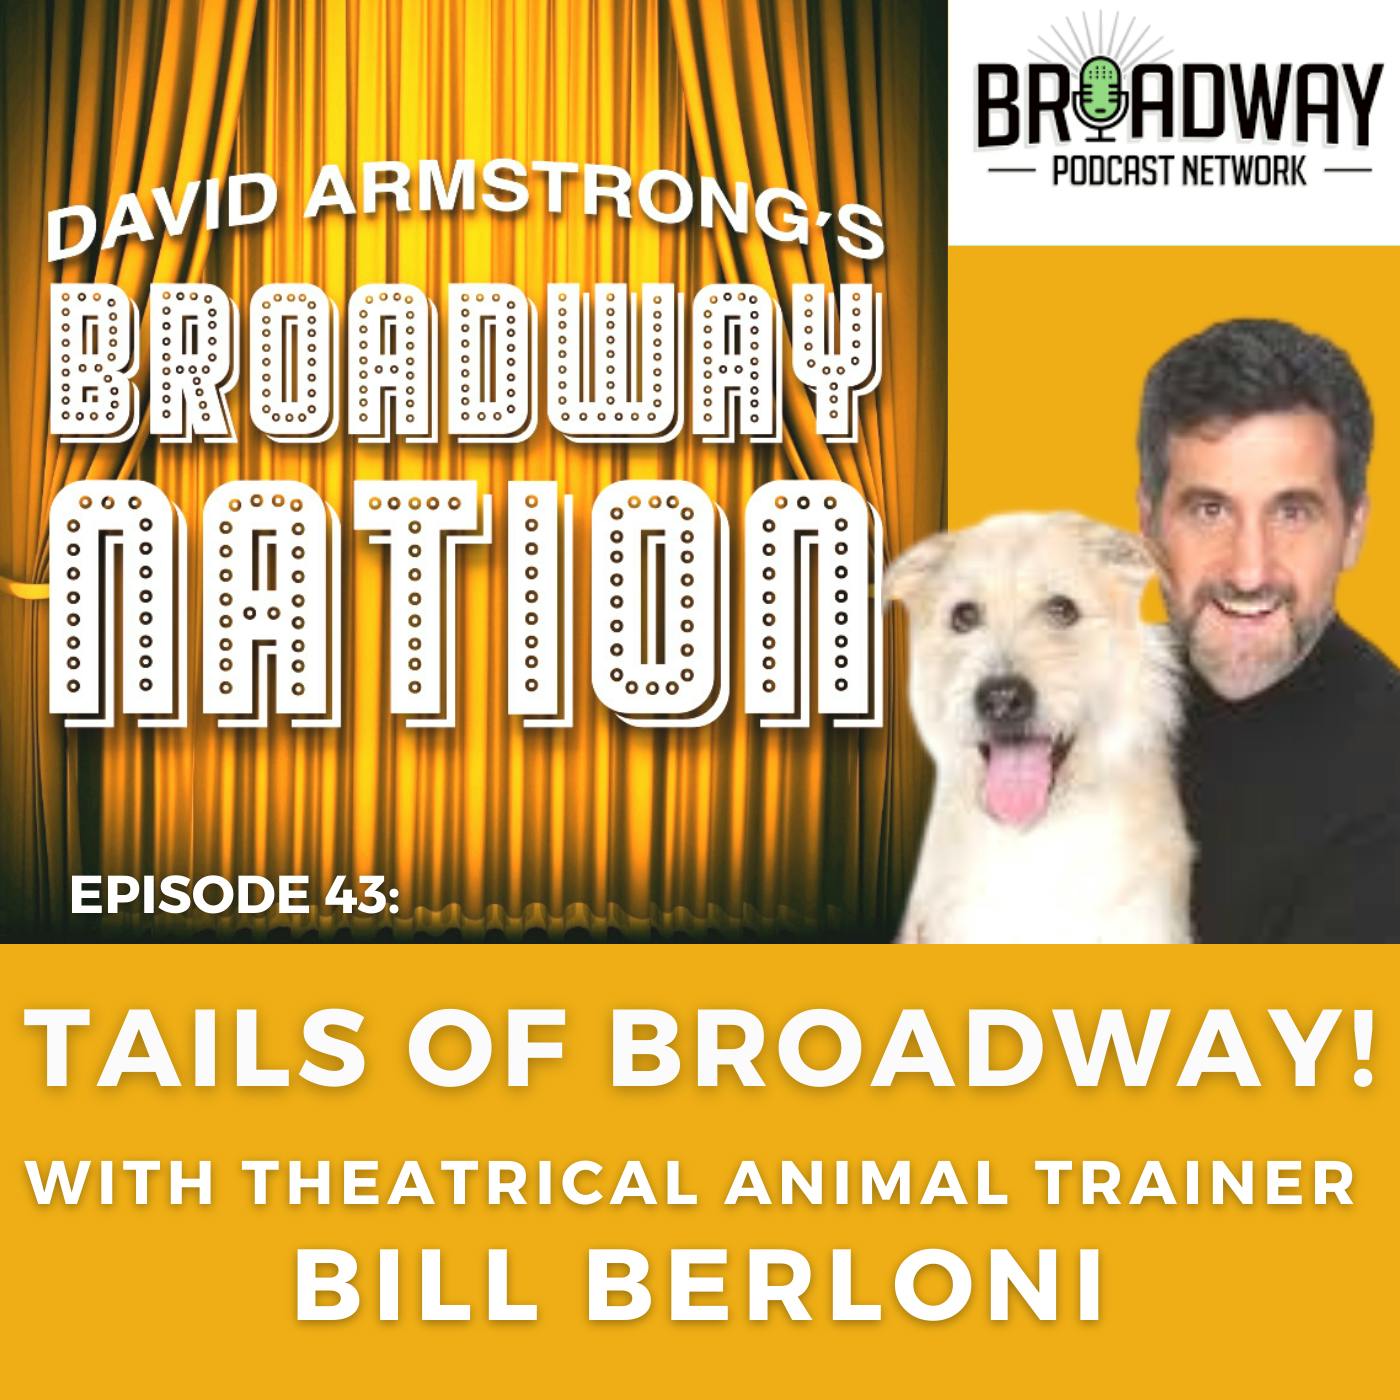 Episode 43: TAILS OF BROADWAY! with theatrical animal trainer BILL BERLONI Image